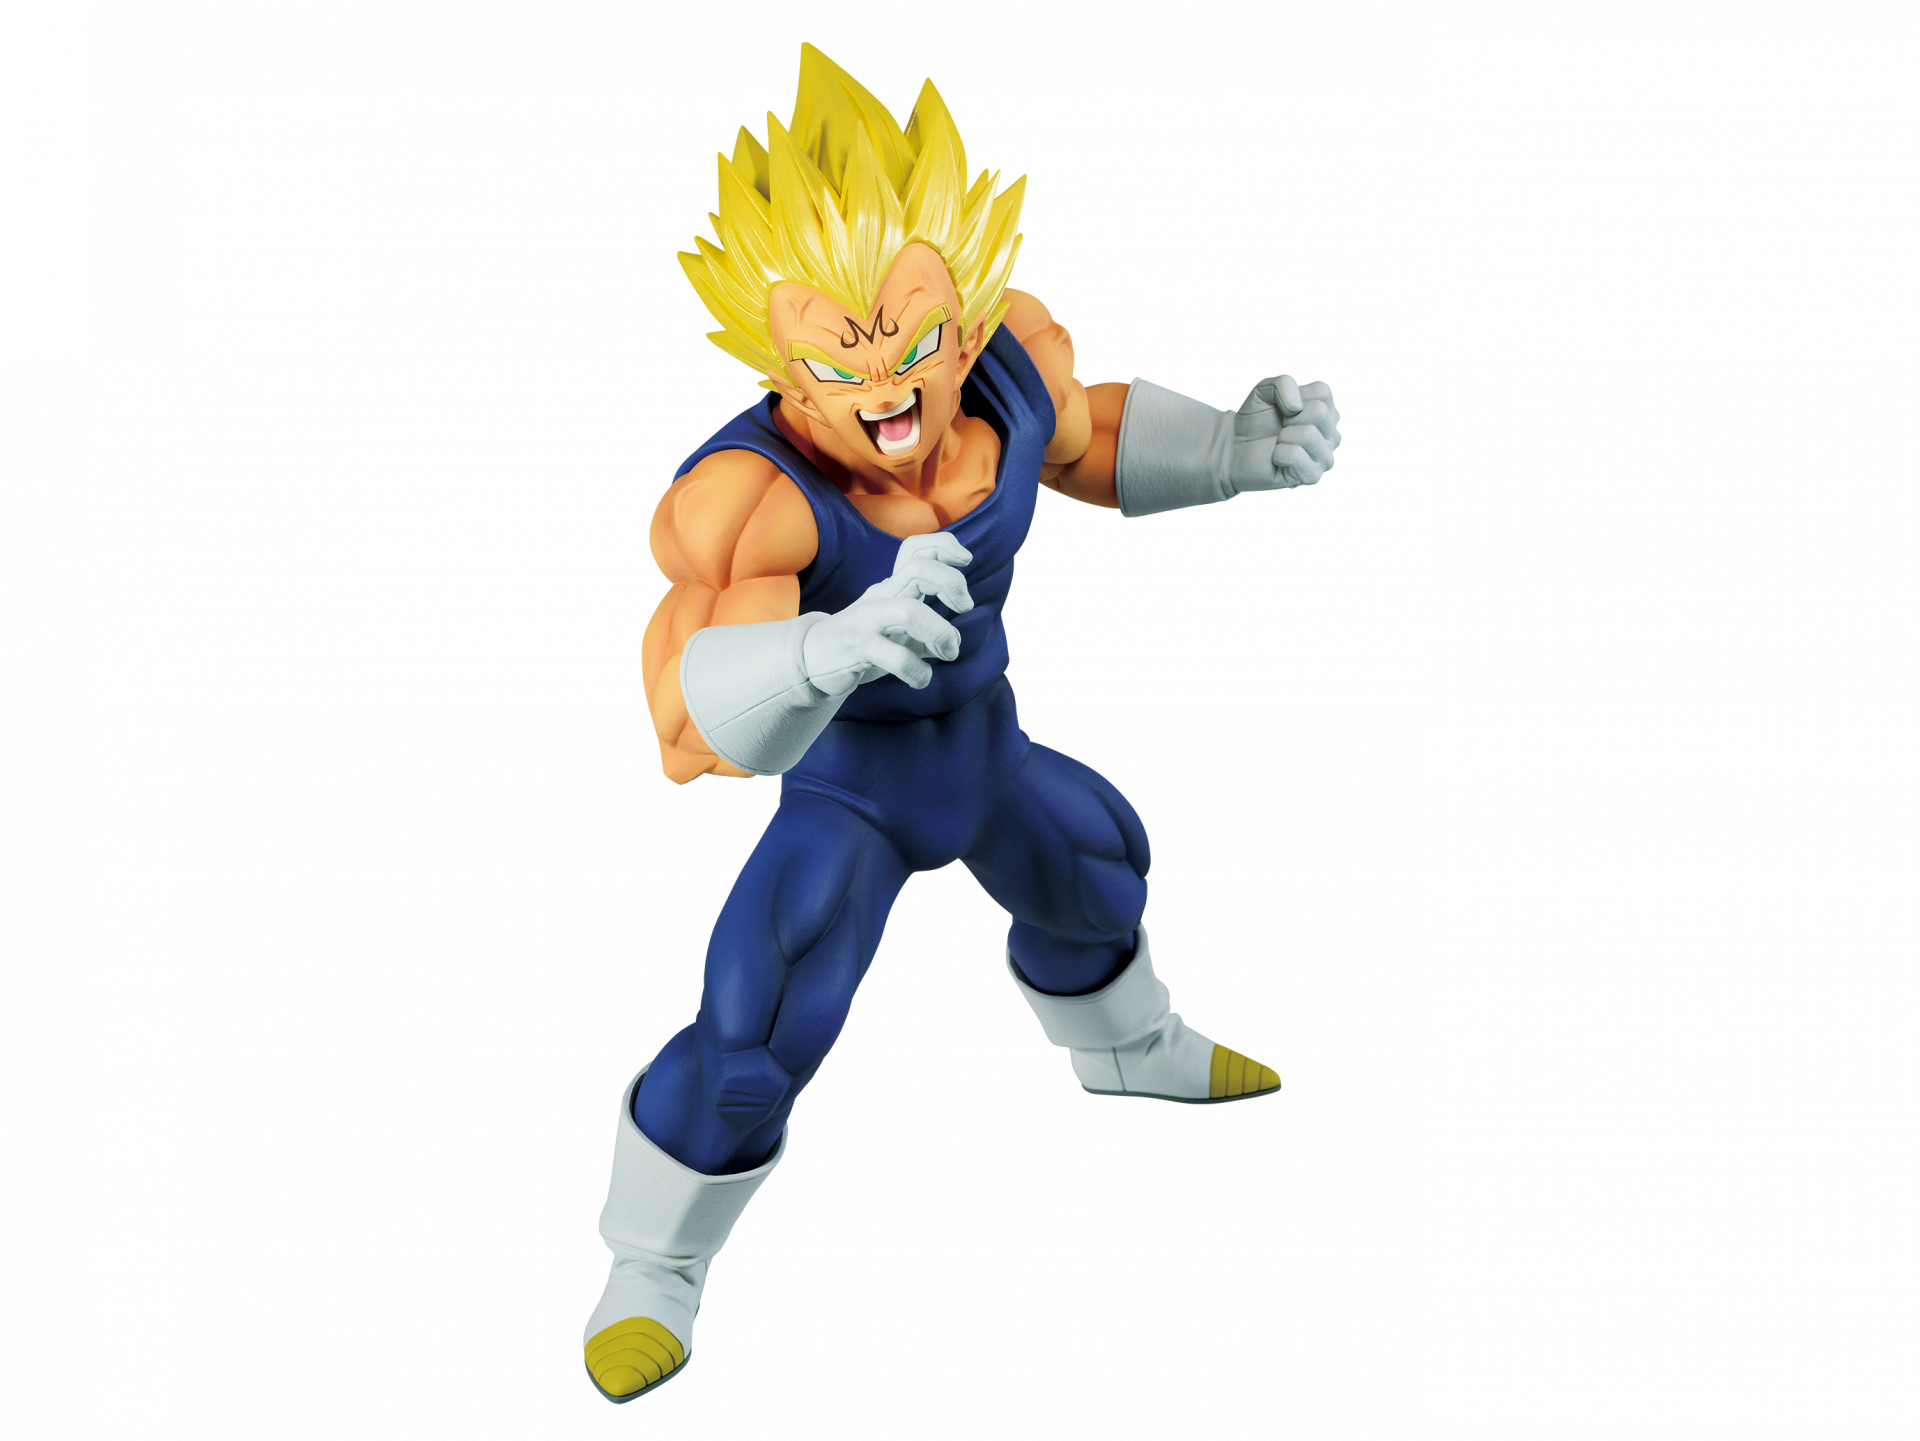 Majin Vegeta Storms into the MAXIMATIC Series with Overwhelming Presence!